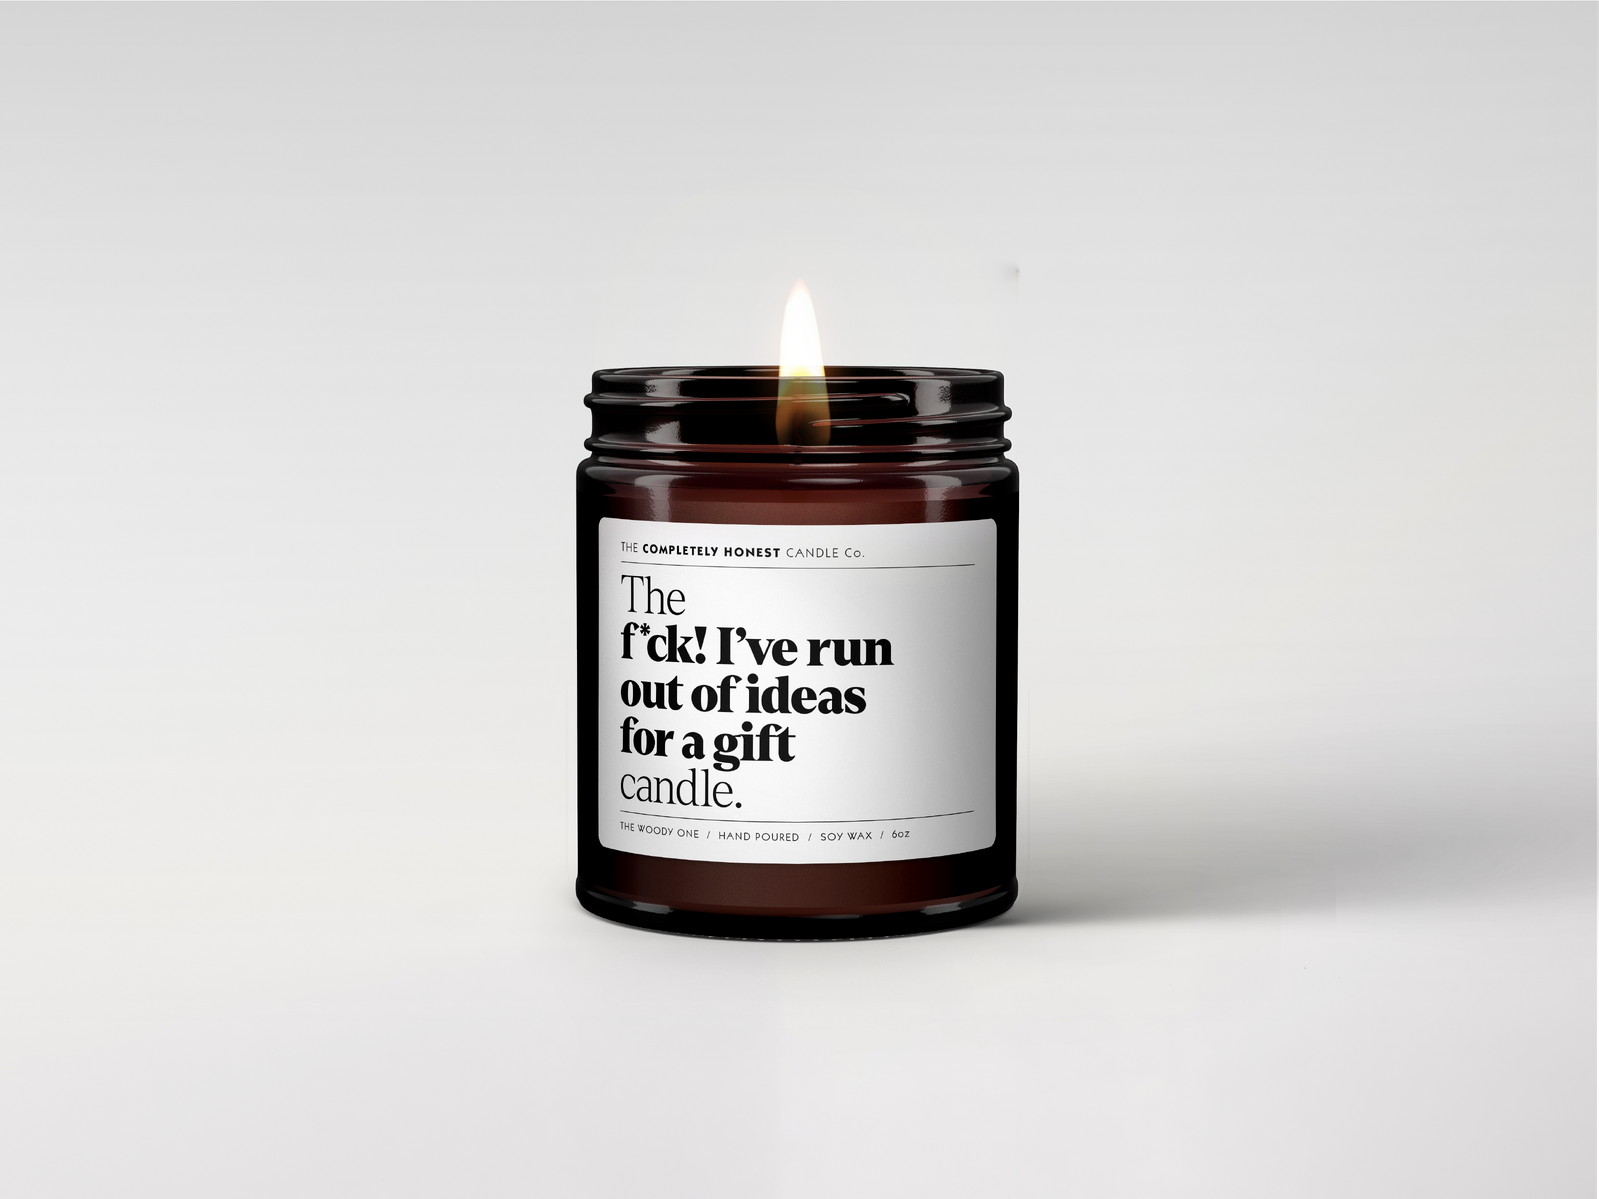 The F*CK! I've run out of ideas for a gift candle